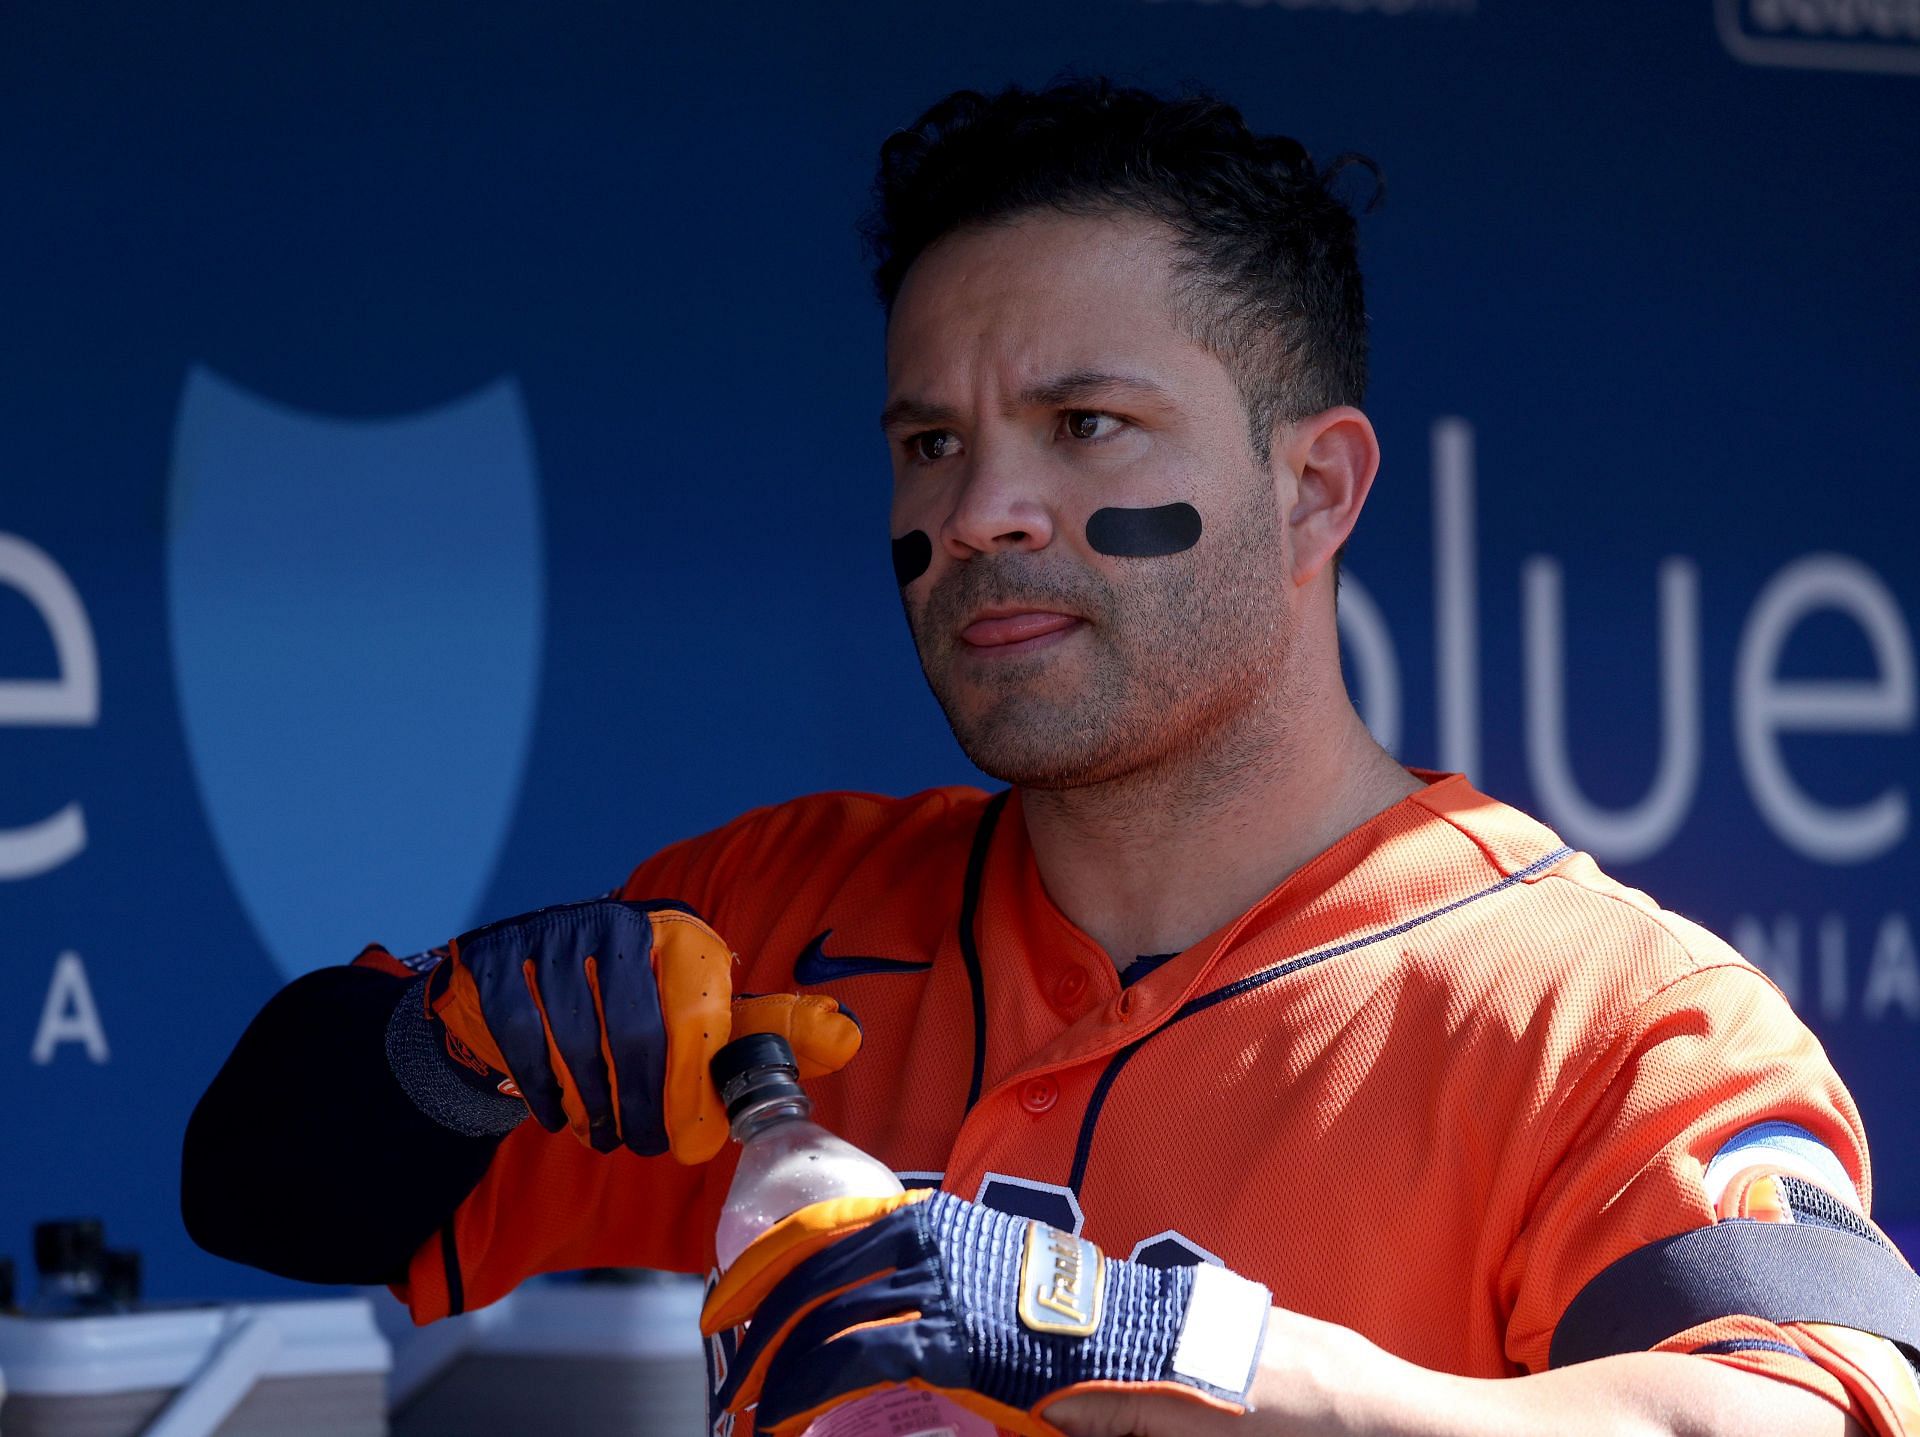 Jose Altuve of the Houston Astros in the dugout before the game against the Los Angeles Dodgers at Dodger Stadium